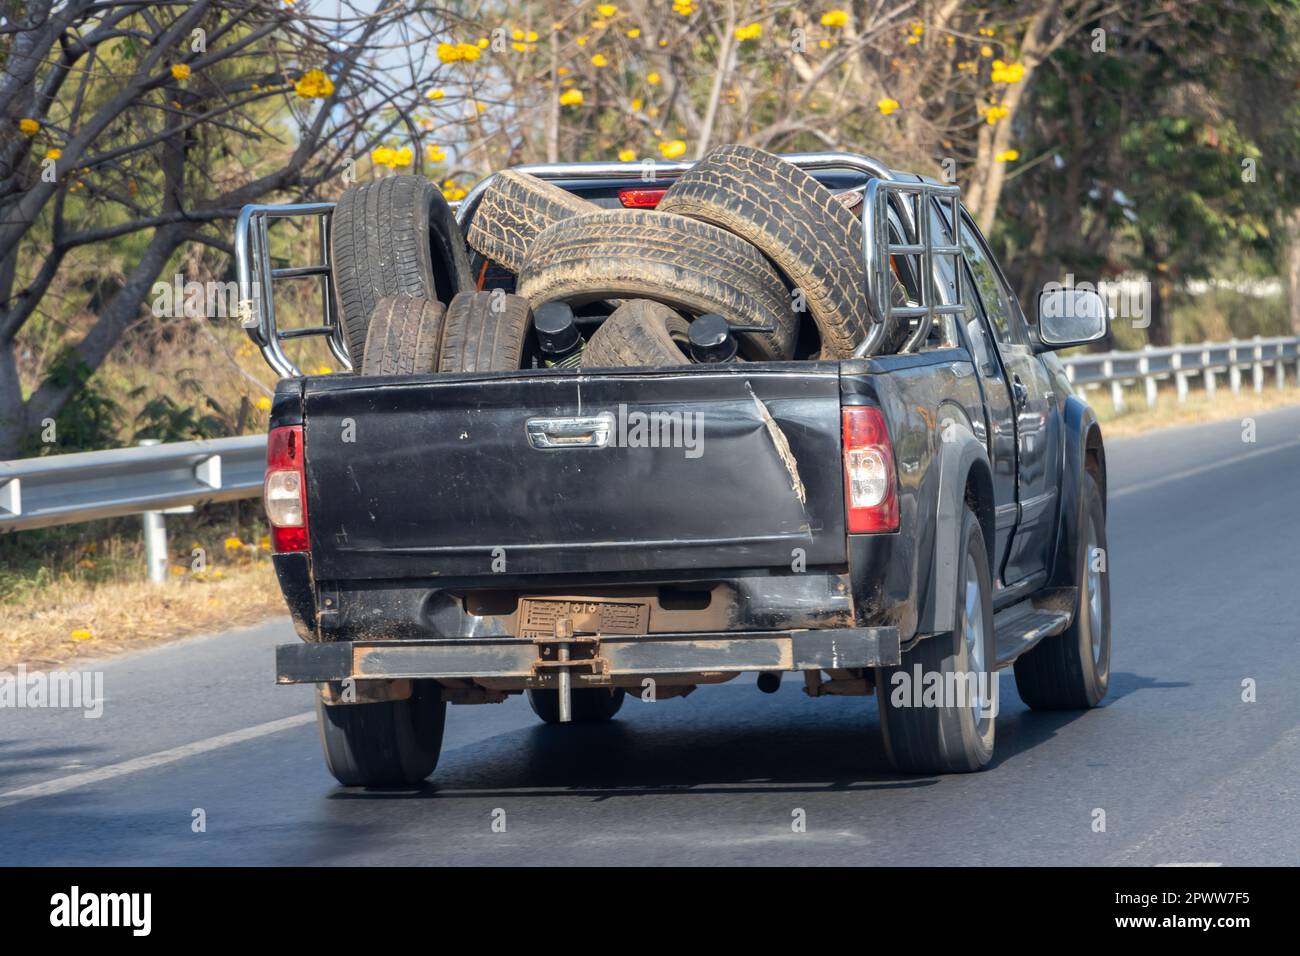 Transporting old tires on a pickup truck, Thailand Stock Photo